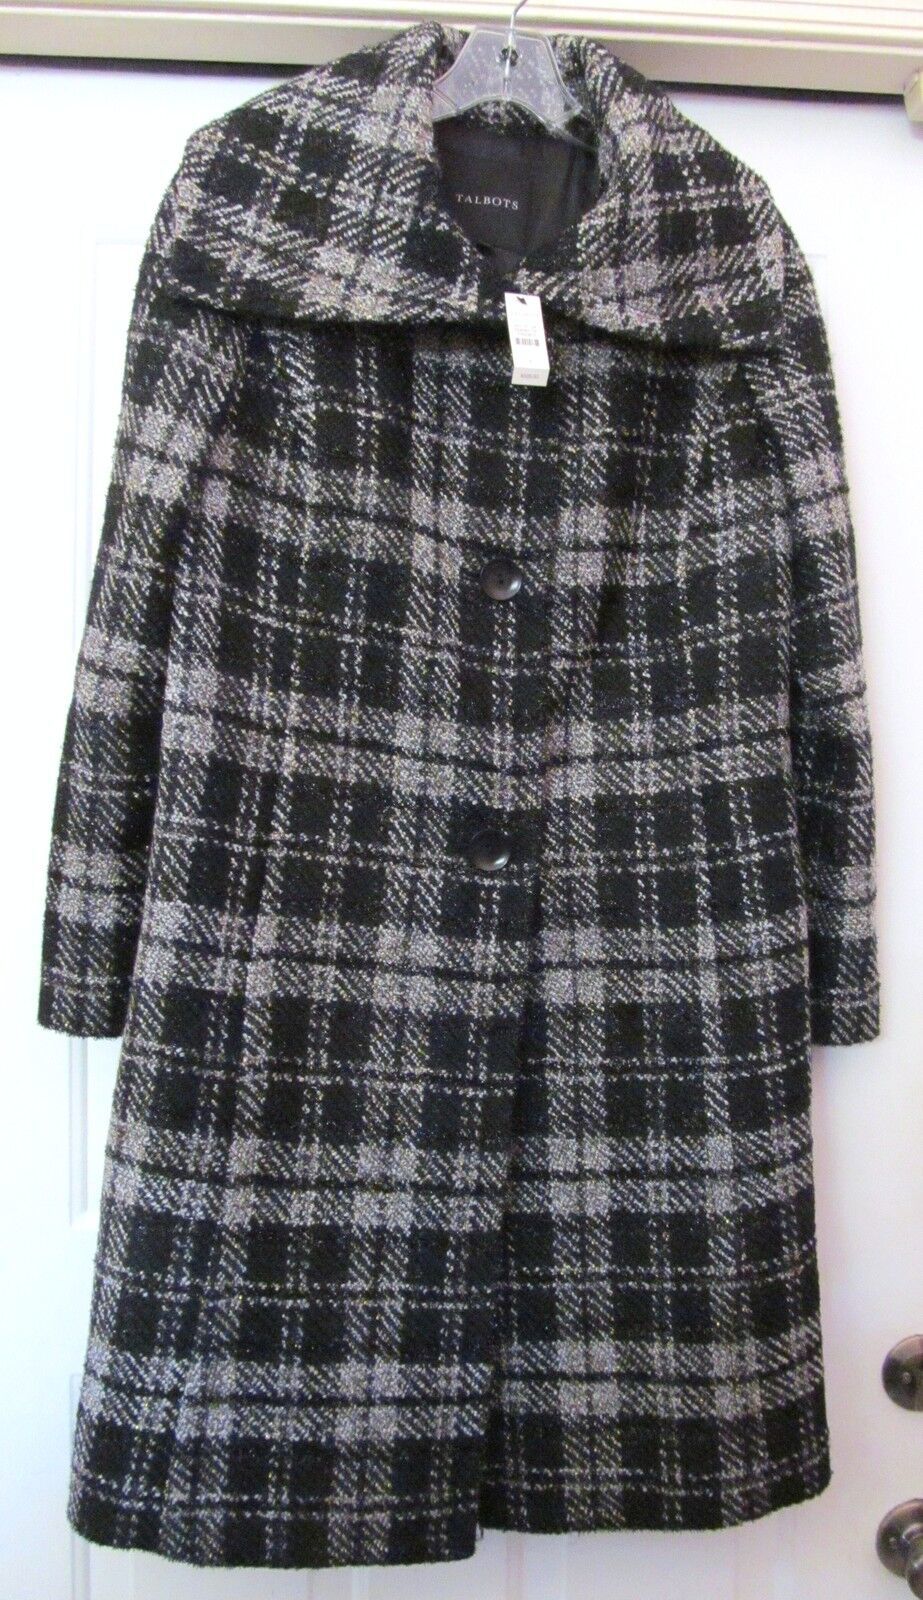 Primary image for TALBOTS Coat Raglan Sleeves Poly Blend Metallic Check Black Grey 8 NWT MSRP $329